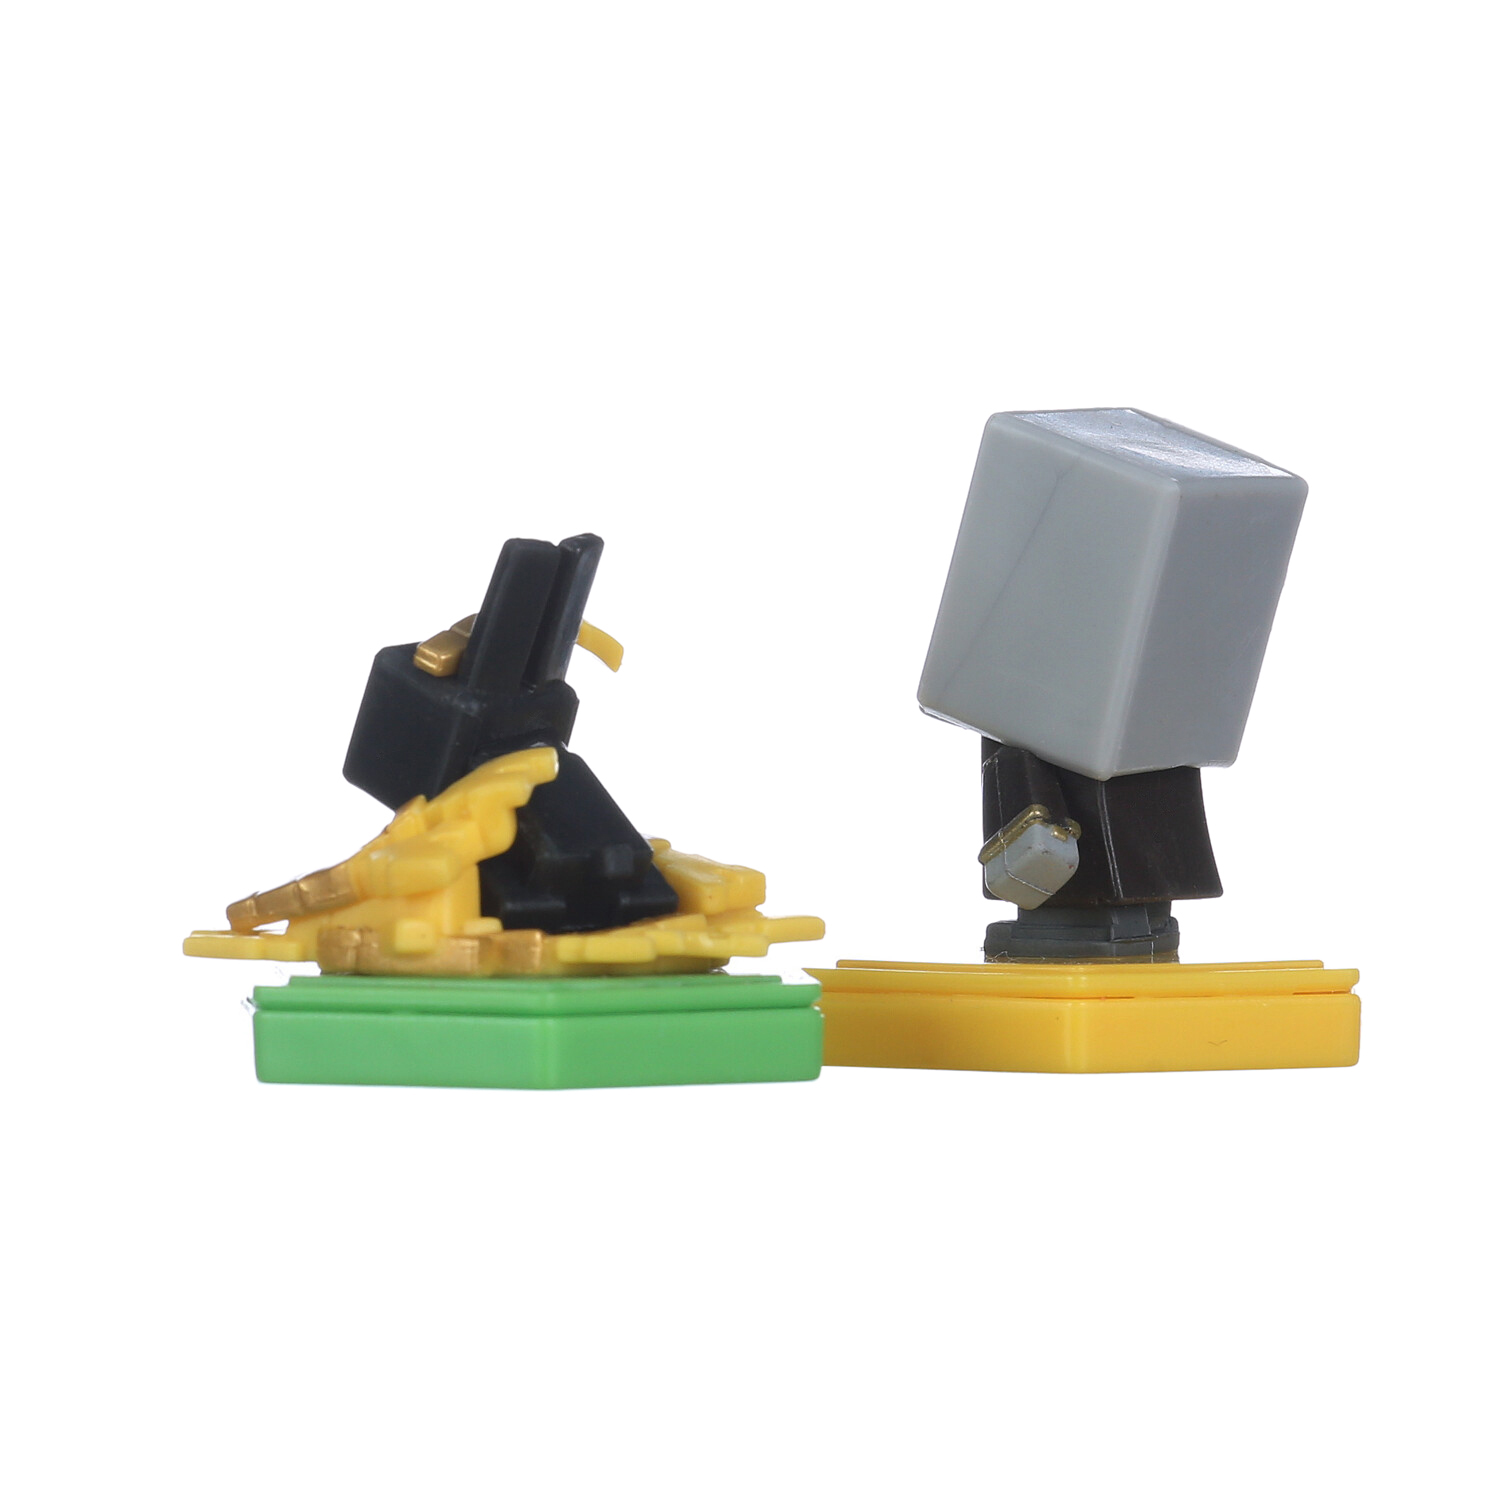 MINECRAFT EARTH Boost Mini Figure 2-pack, NFC Chip Enabled for